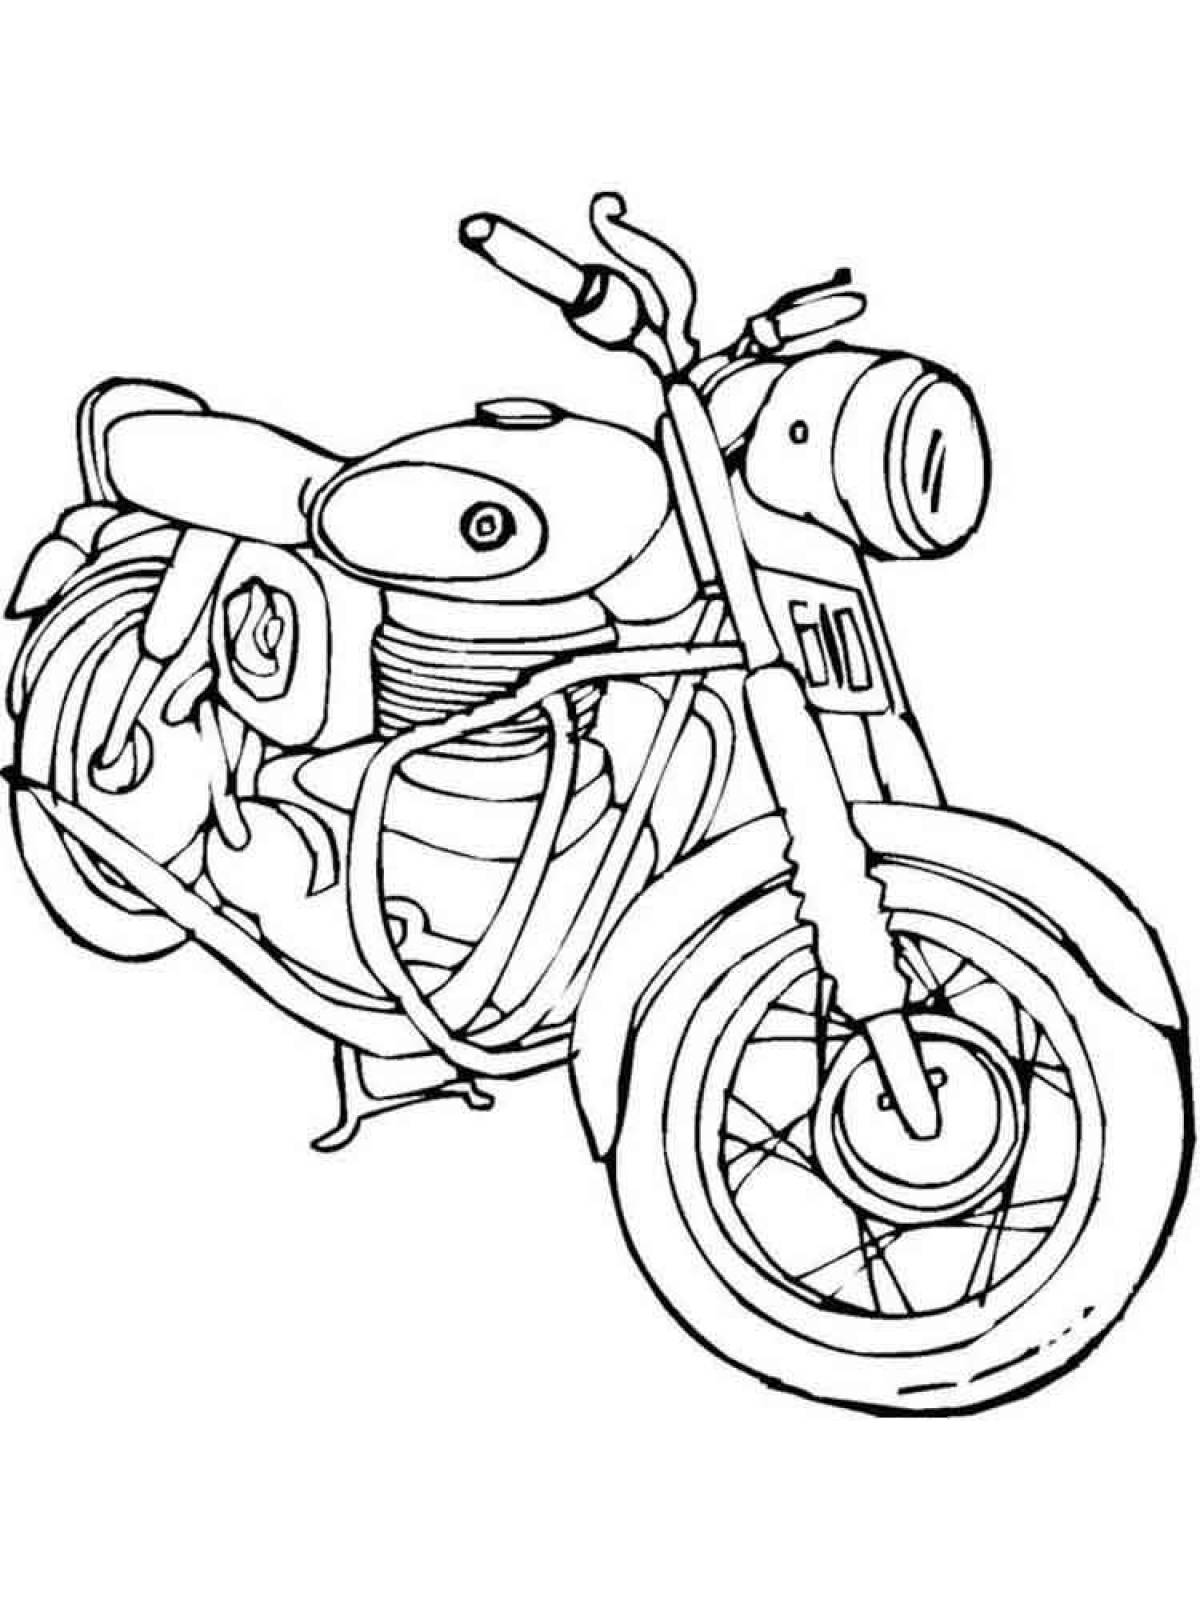 Colorful motorcycle coloring page for kids